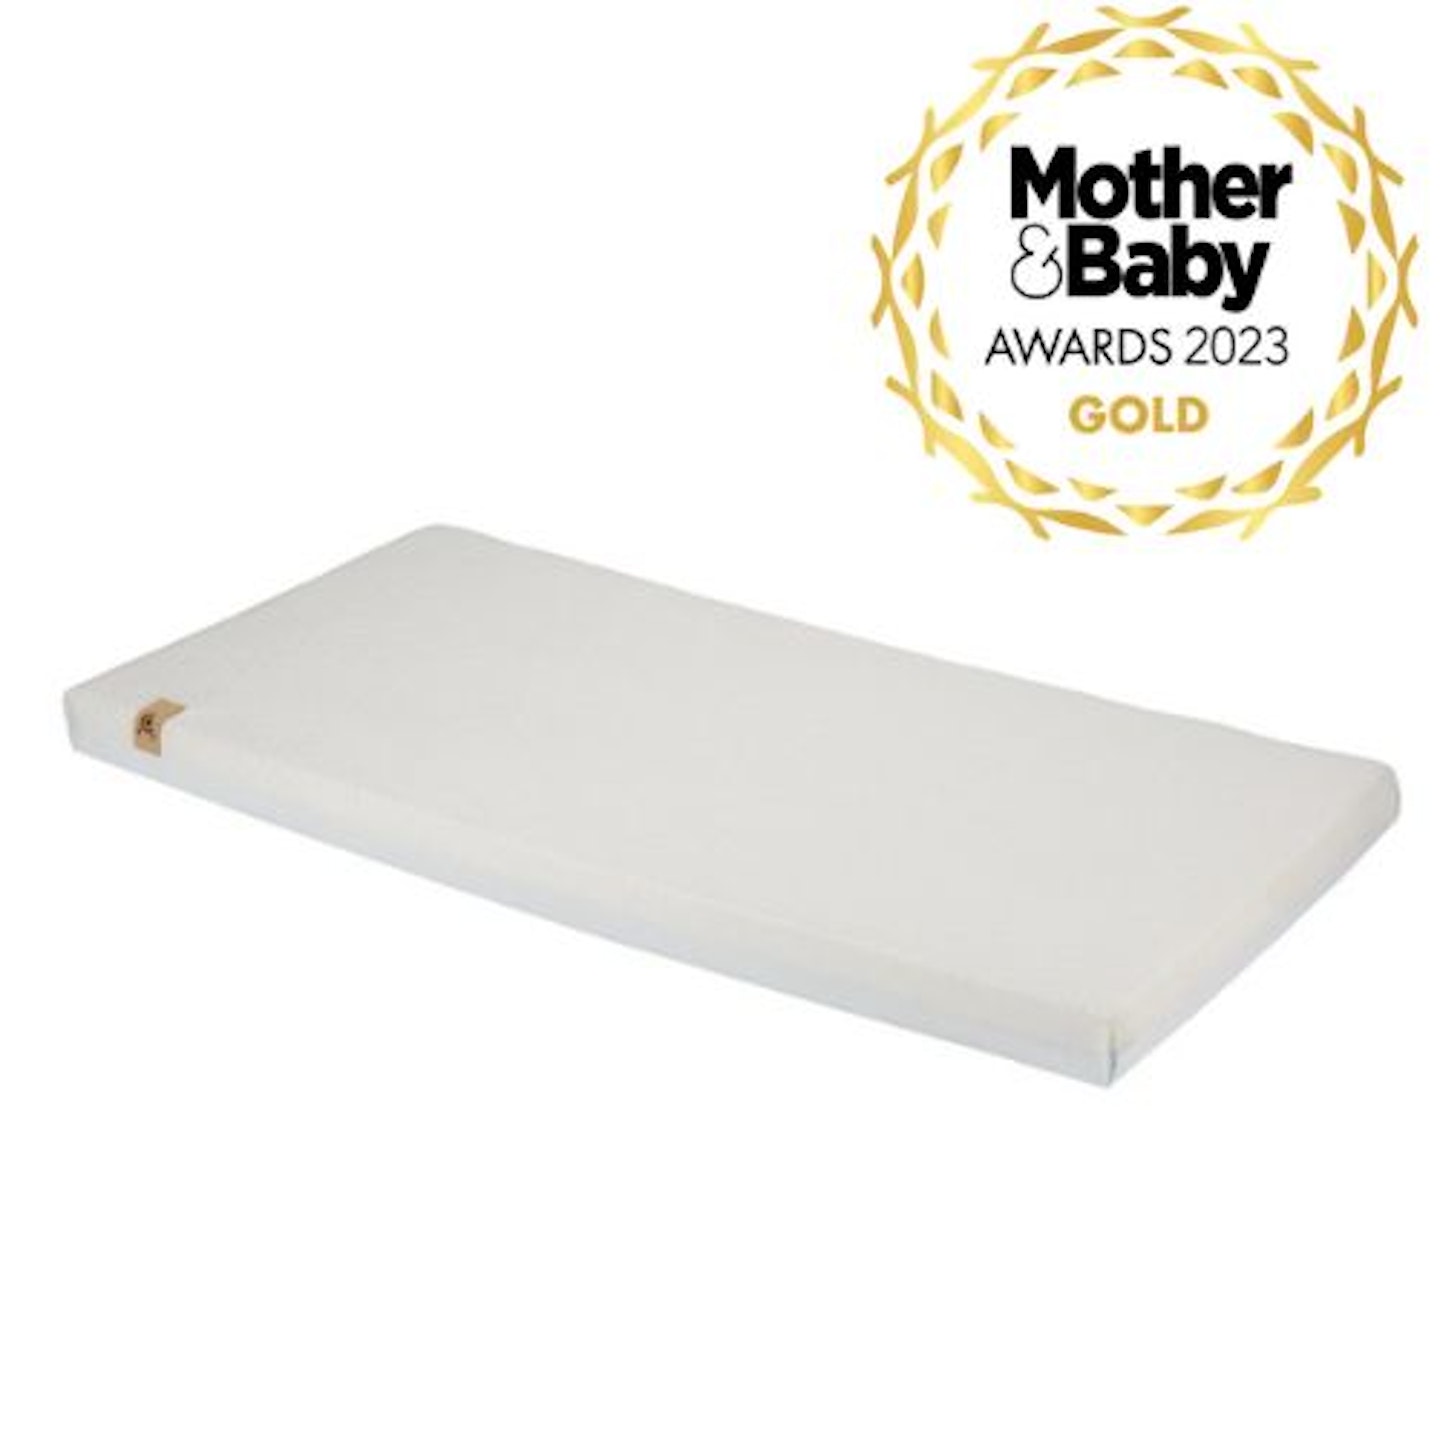 CuddleCo Lullaby hypo-allergenic bamboo cot bed mattress